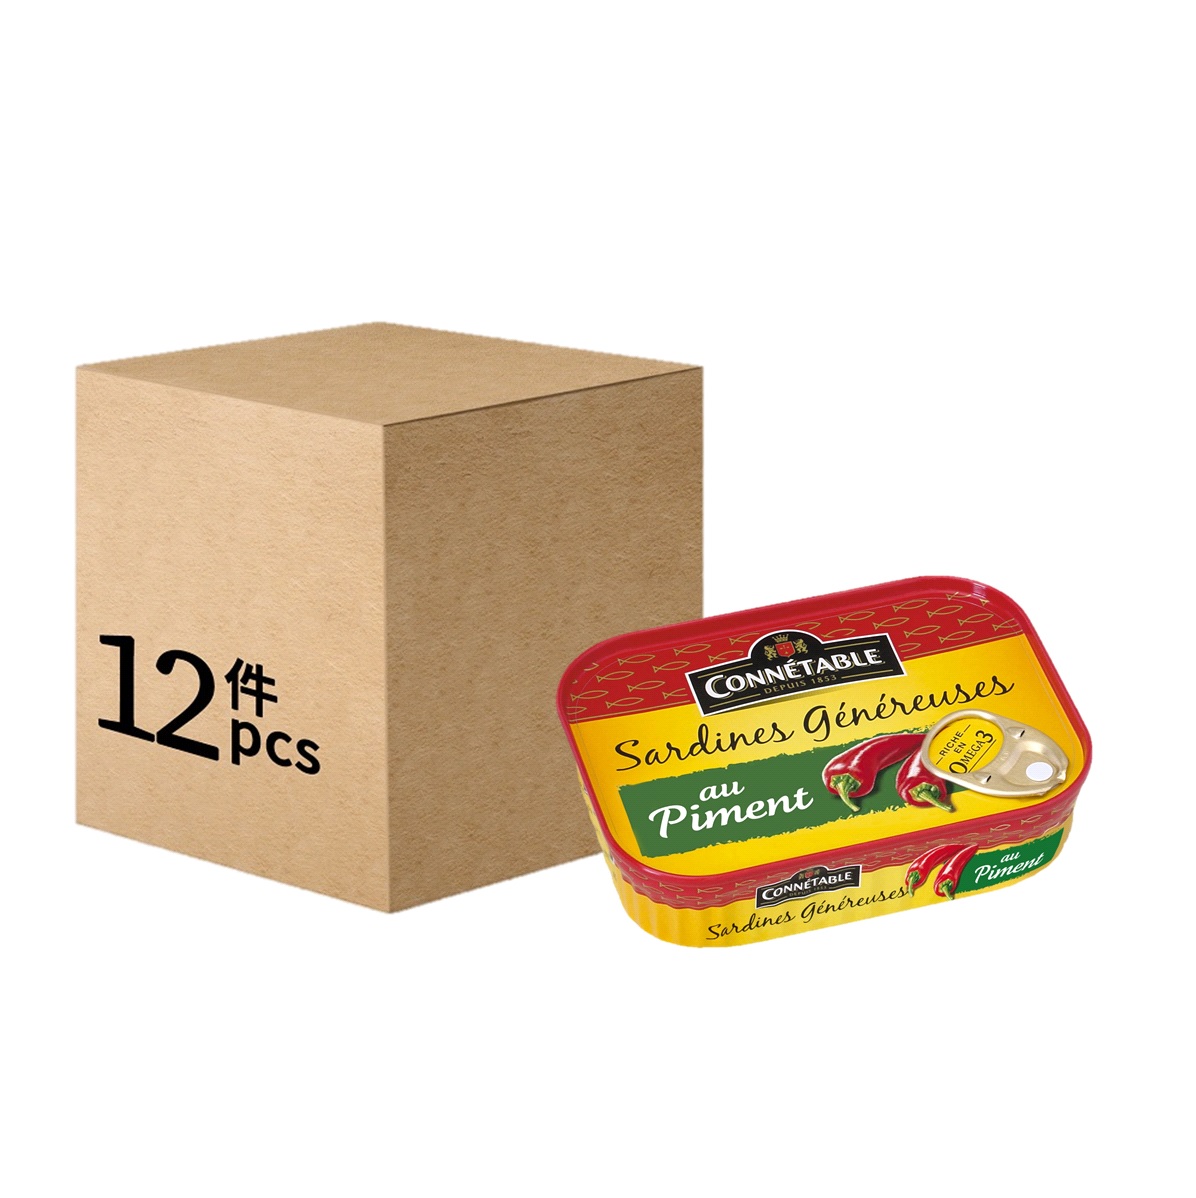 Sardines with Chillies 140g (12 cans)